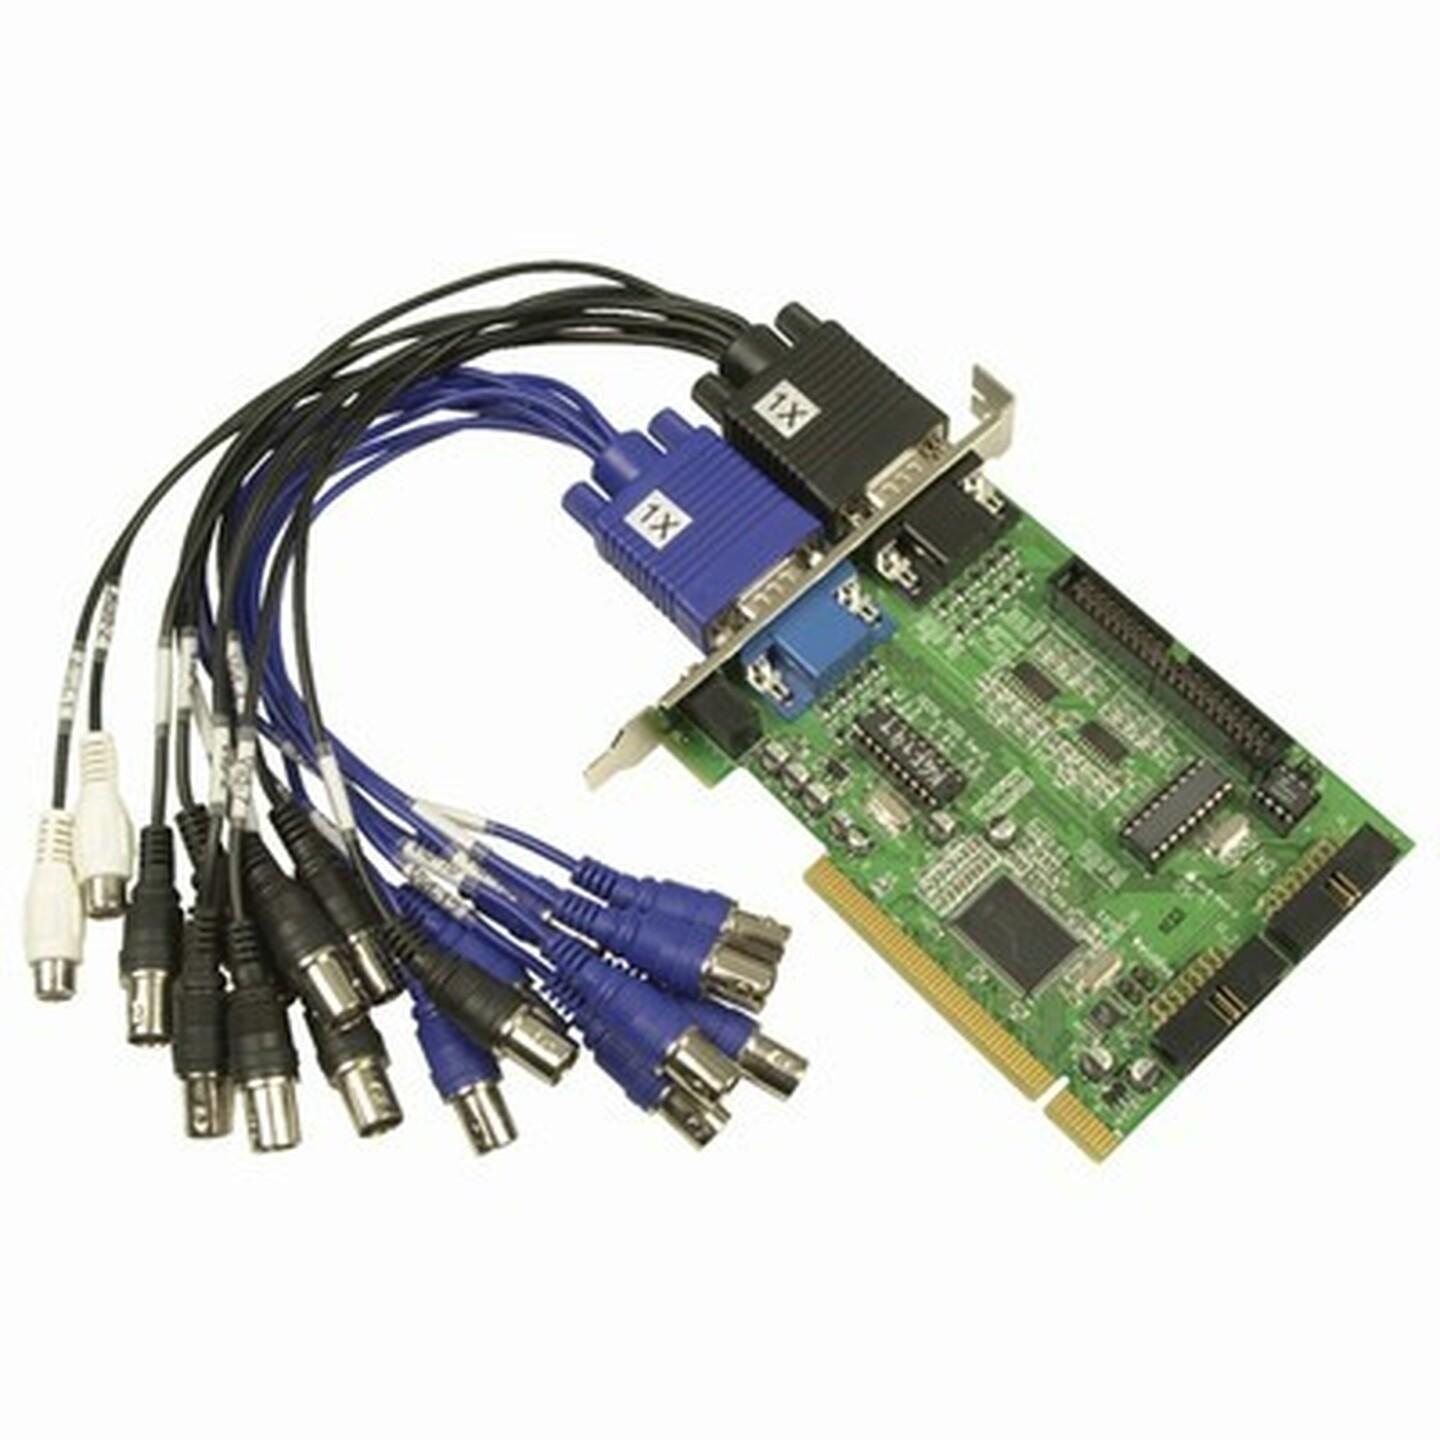 Four Channel Surveillance Video Recording Card with MPEG4 Compression